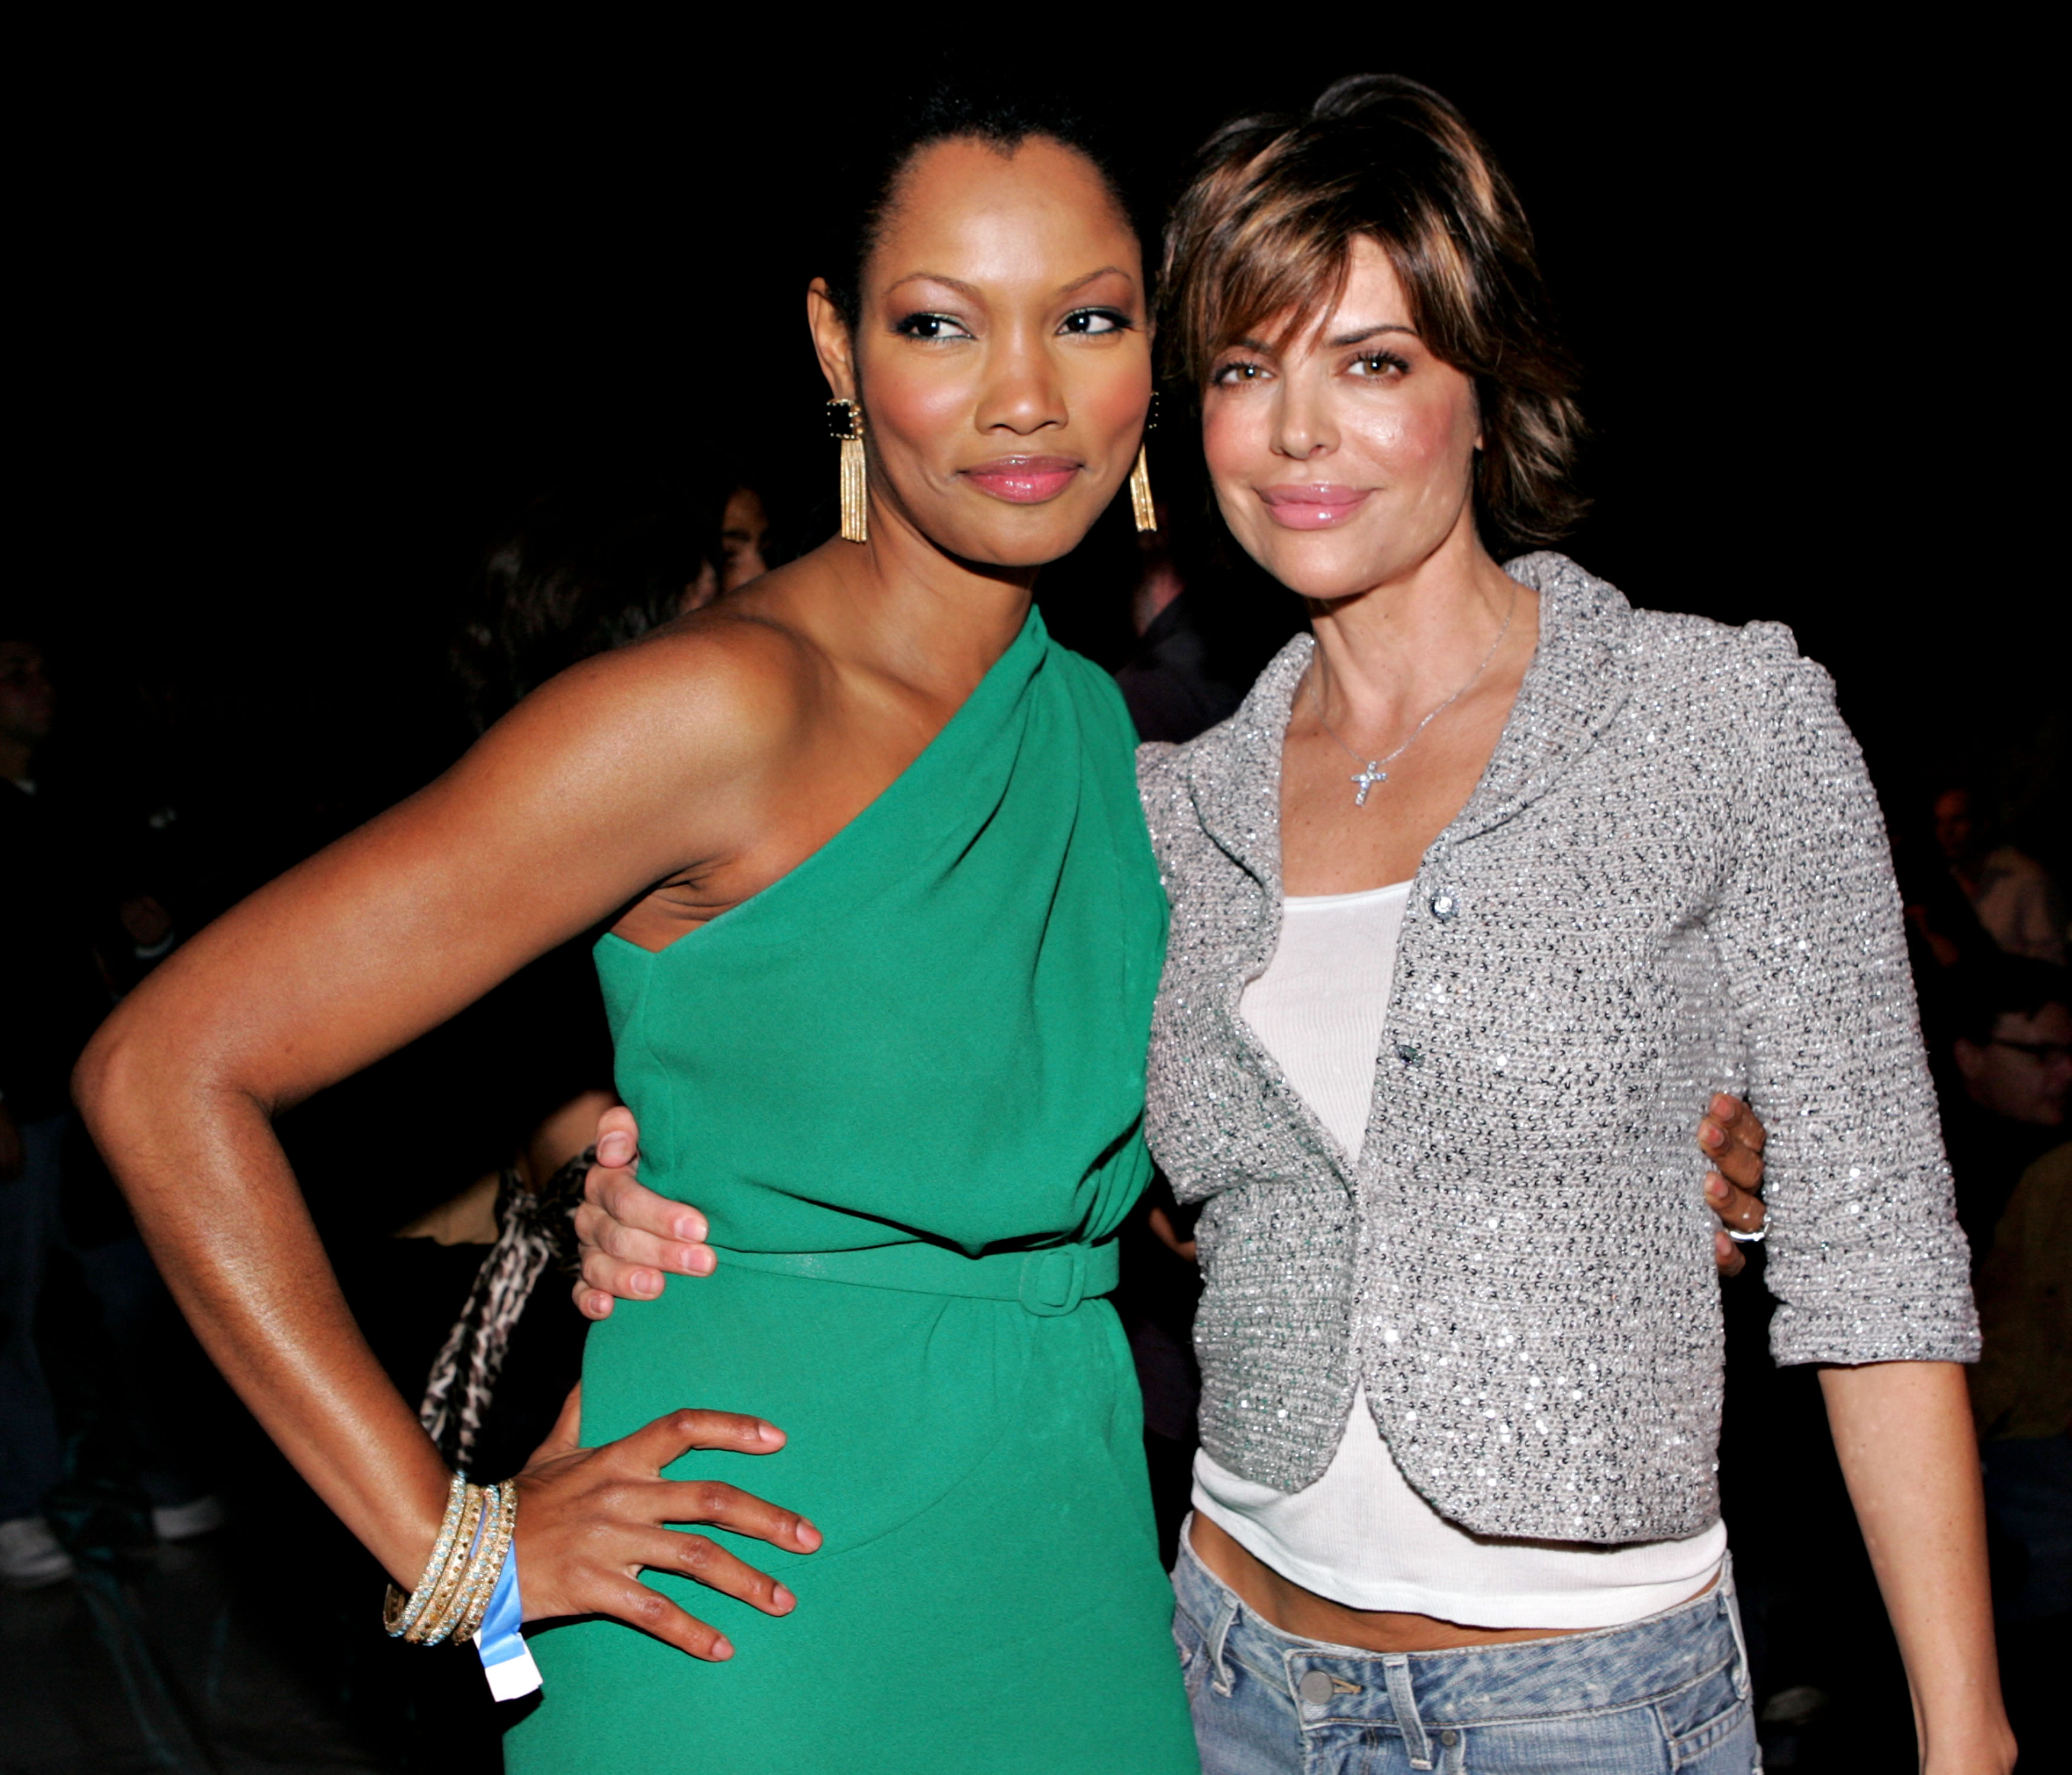 Garcelle Beauvais and Lisa Rinna at a fashion event in LA in 2005